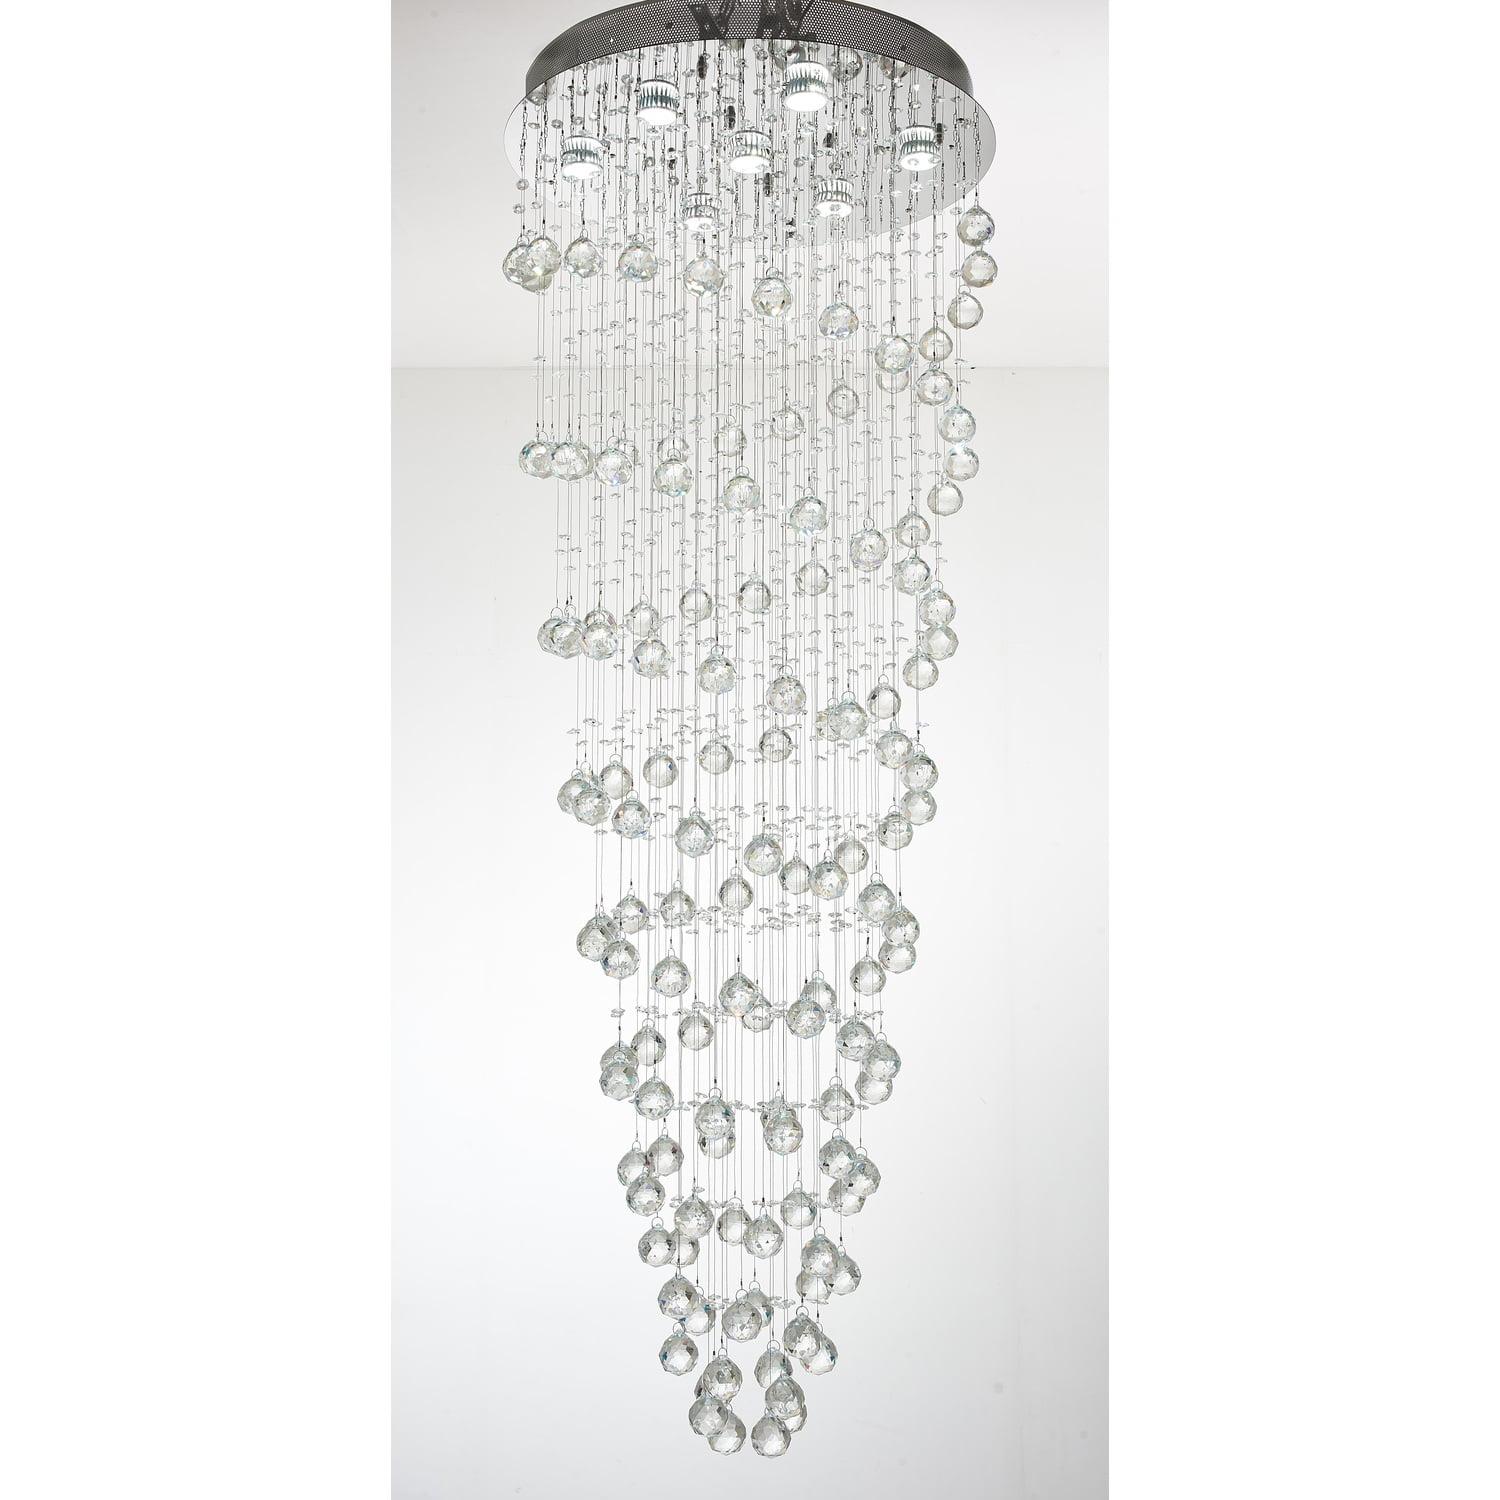 Exquisite Chrome Finish Crystal Spiral Chandelier with Adjustable Cord